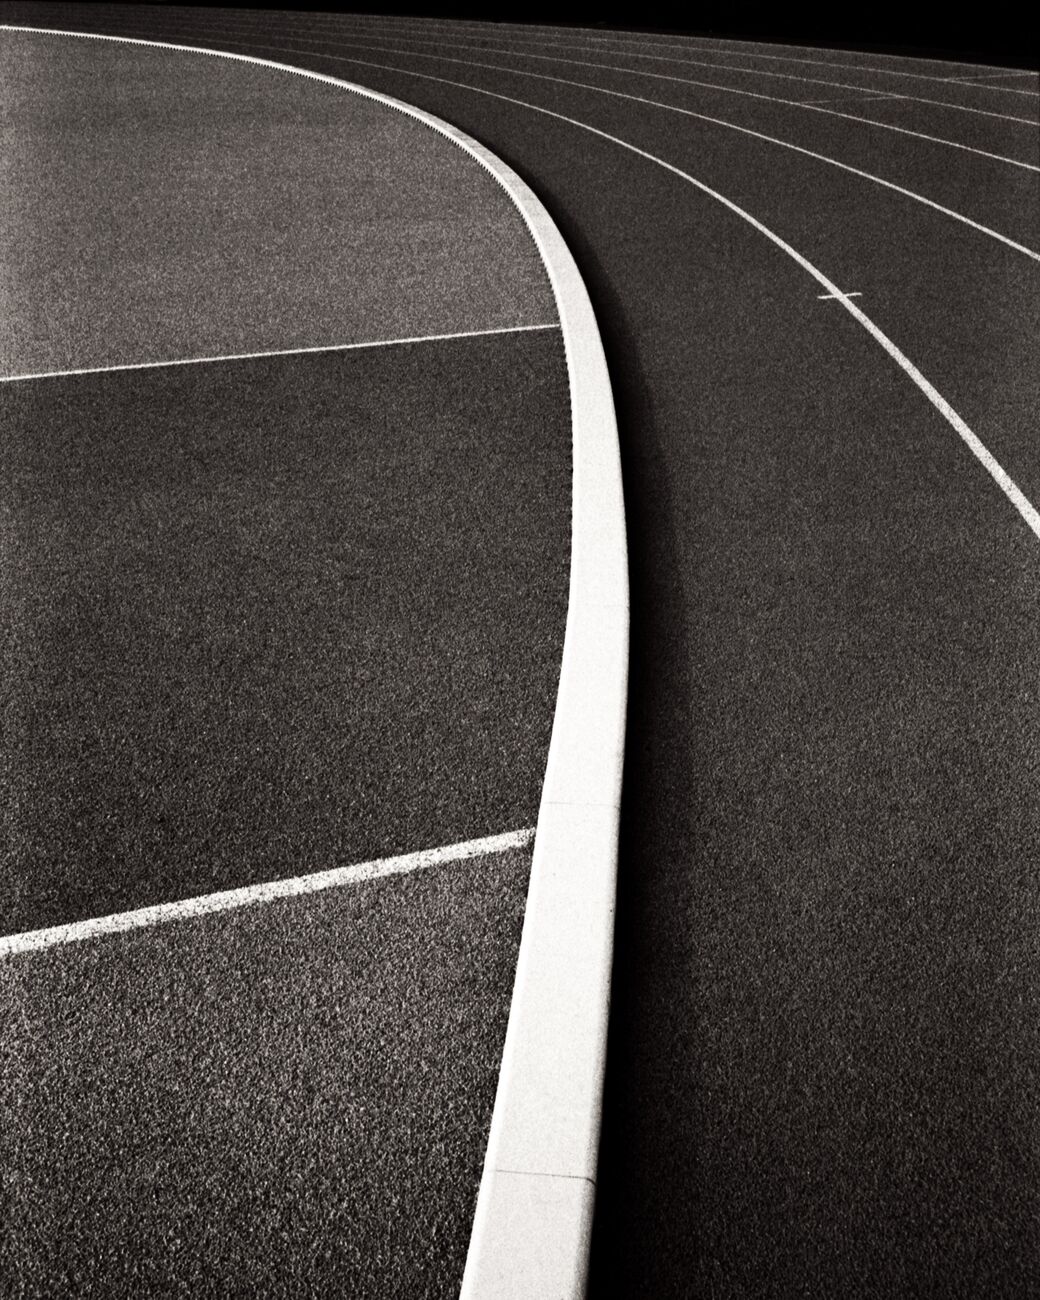 Photography 7.2 x 9.1 in, Running Track. Ref-11621-2 - Denis Olivier Art Photography